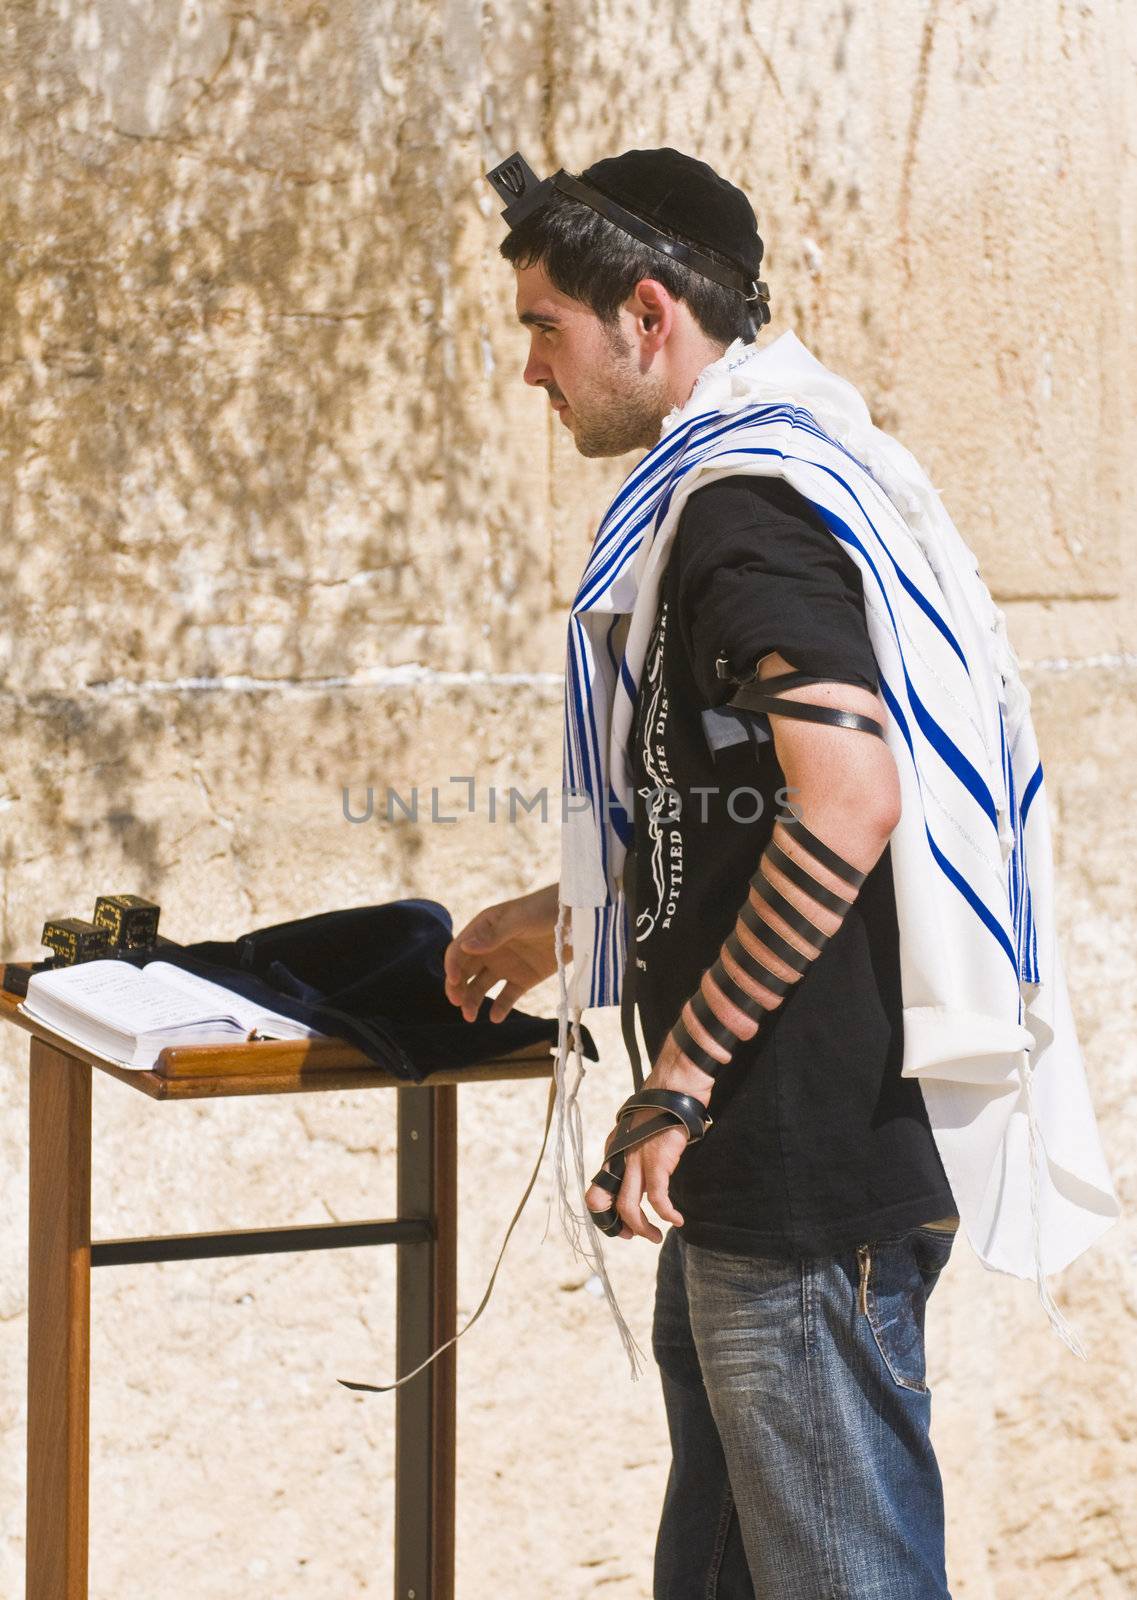 September 2008 Jerusalem Israel - A jew lay tefillin in The western wall an Important Jewish religious site located in the Old City of Jerusalem 